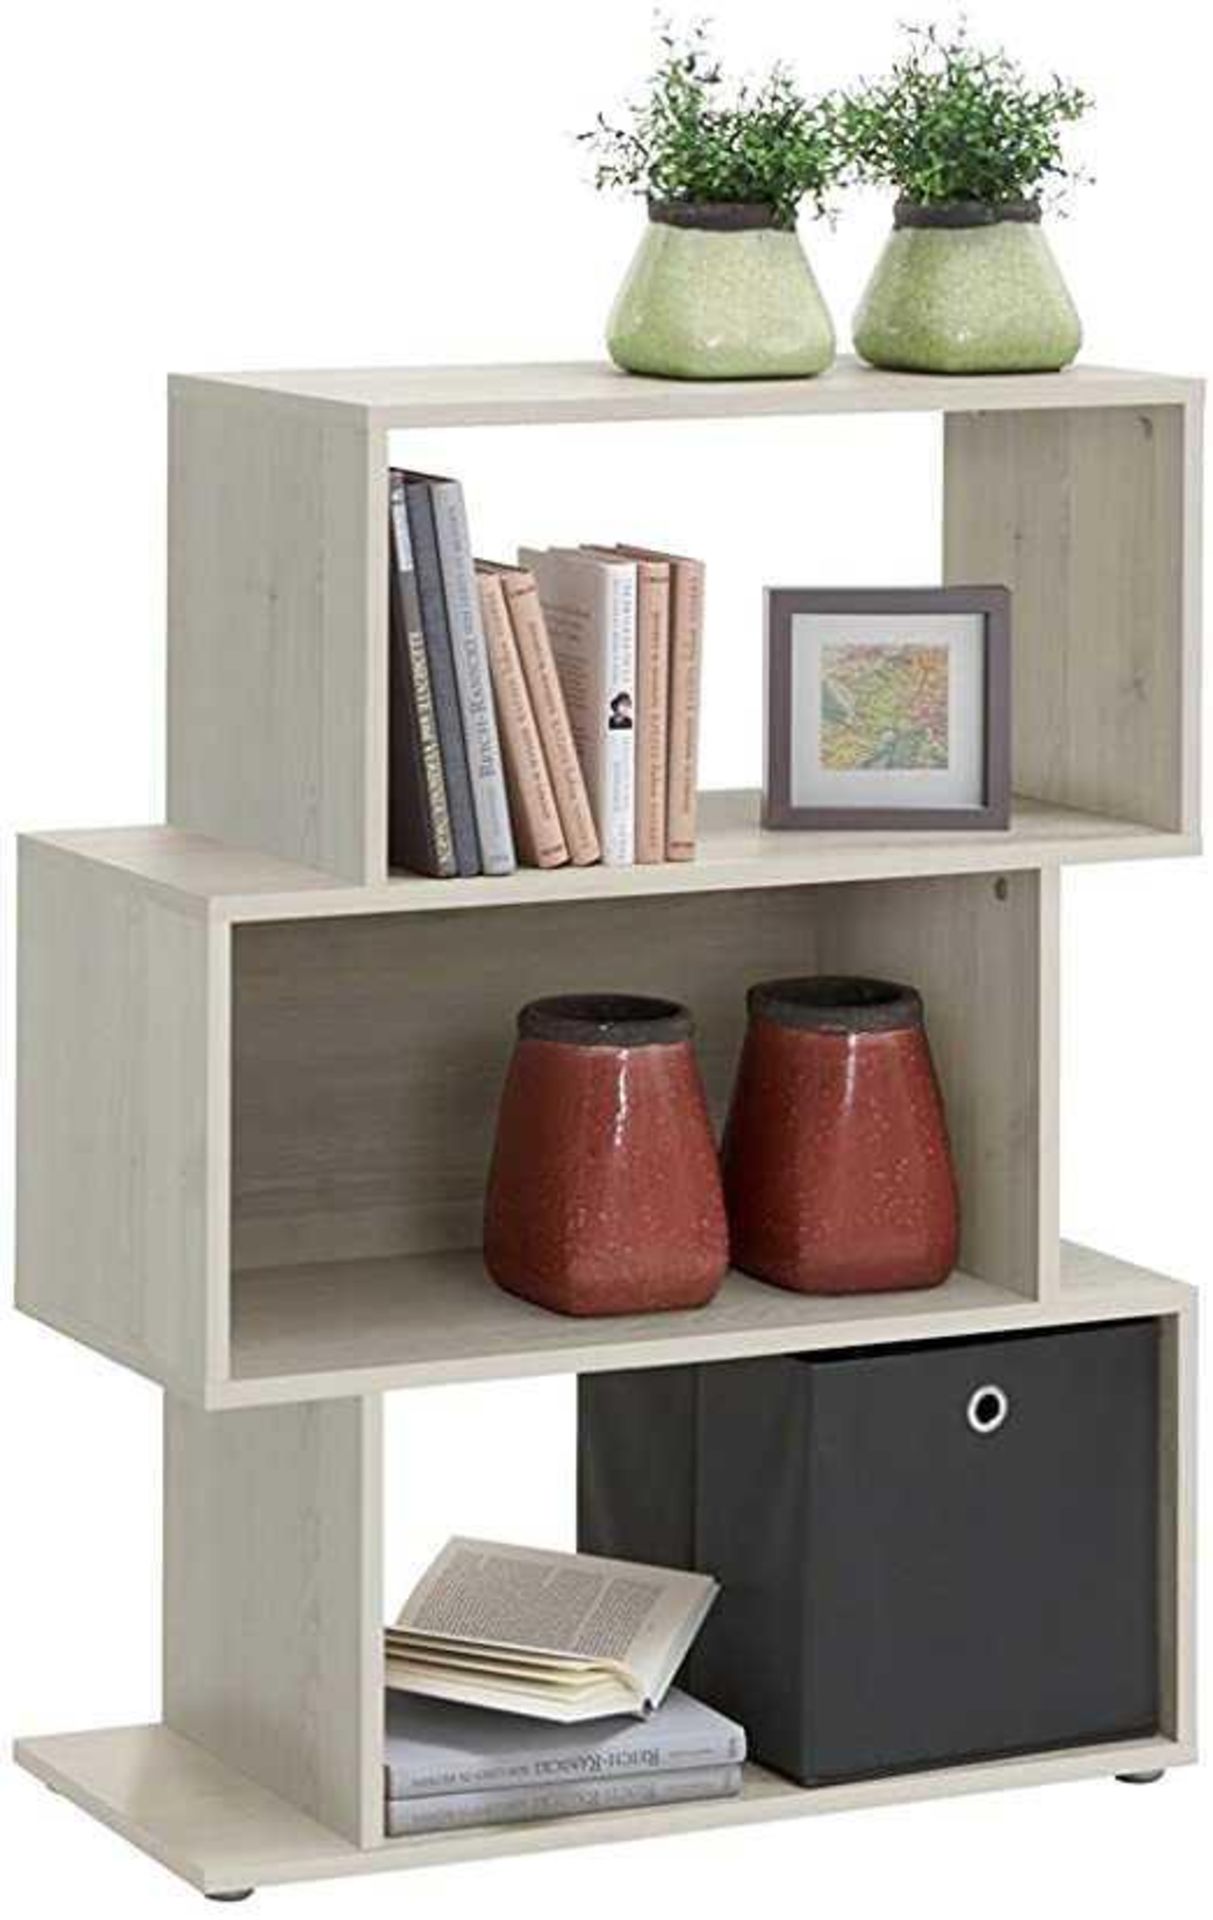 RRP £120. Boxed New Kubi 2 Shelving Unit - Oak Tree (Appraisals Available On Request)(Pictures For